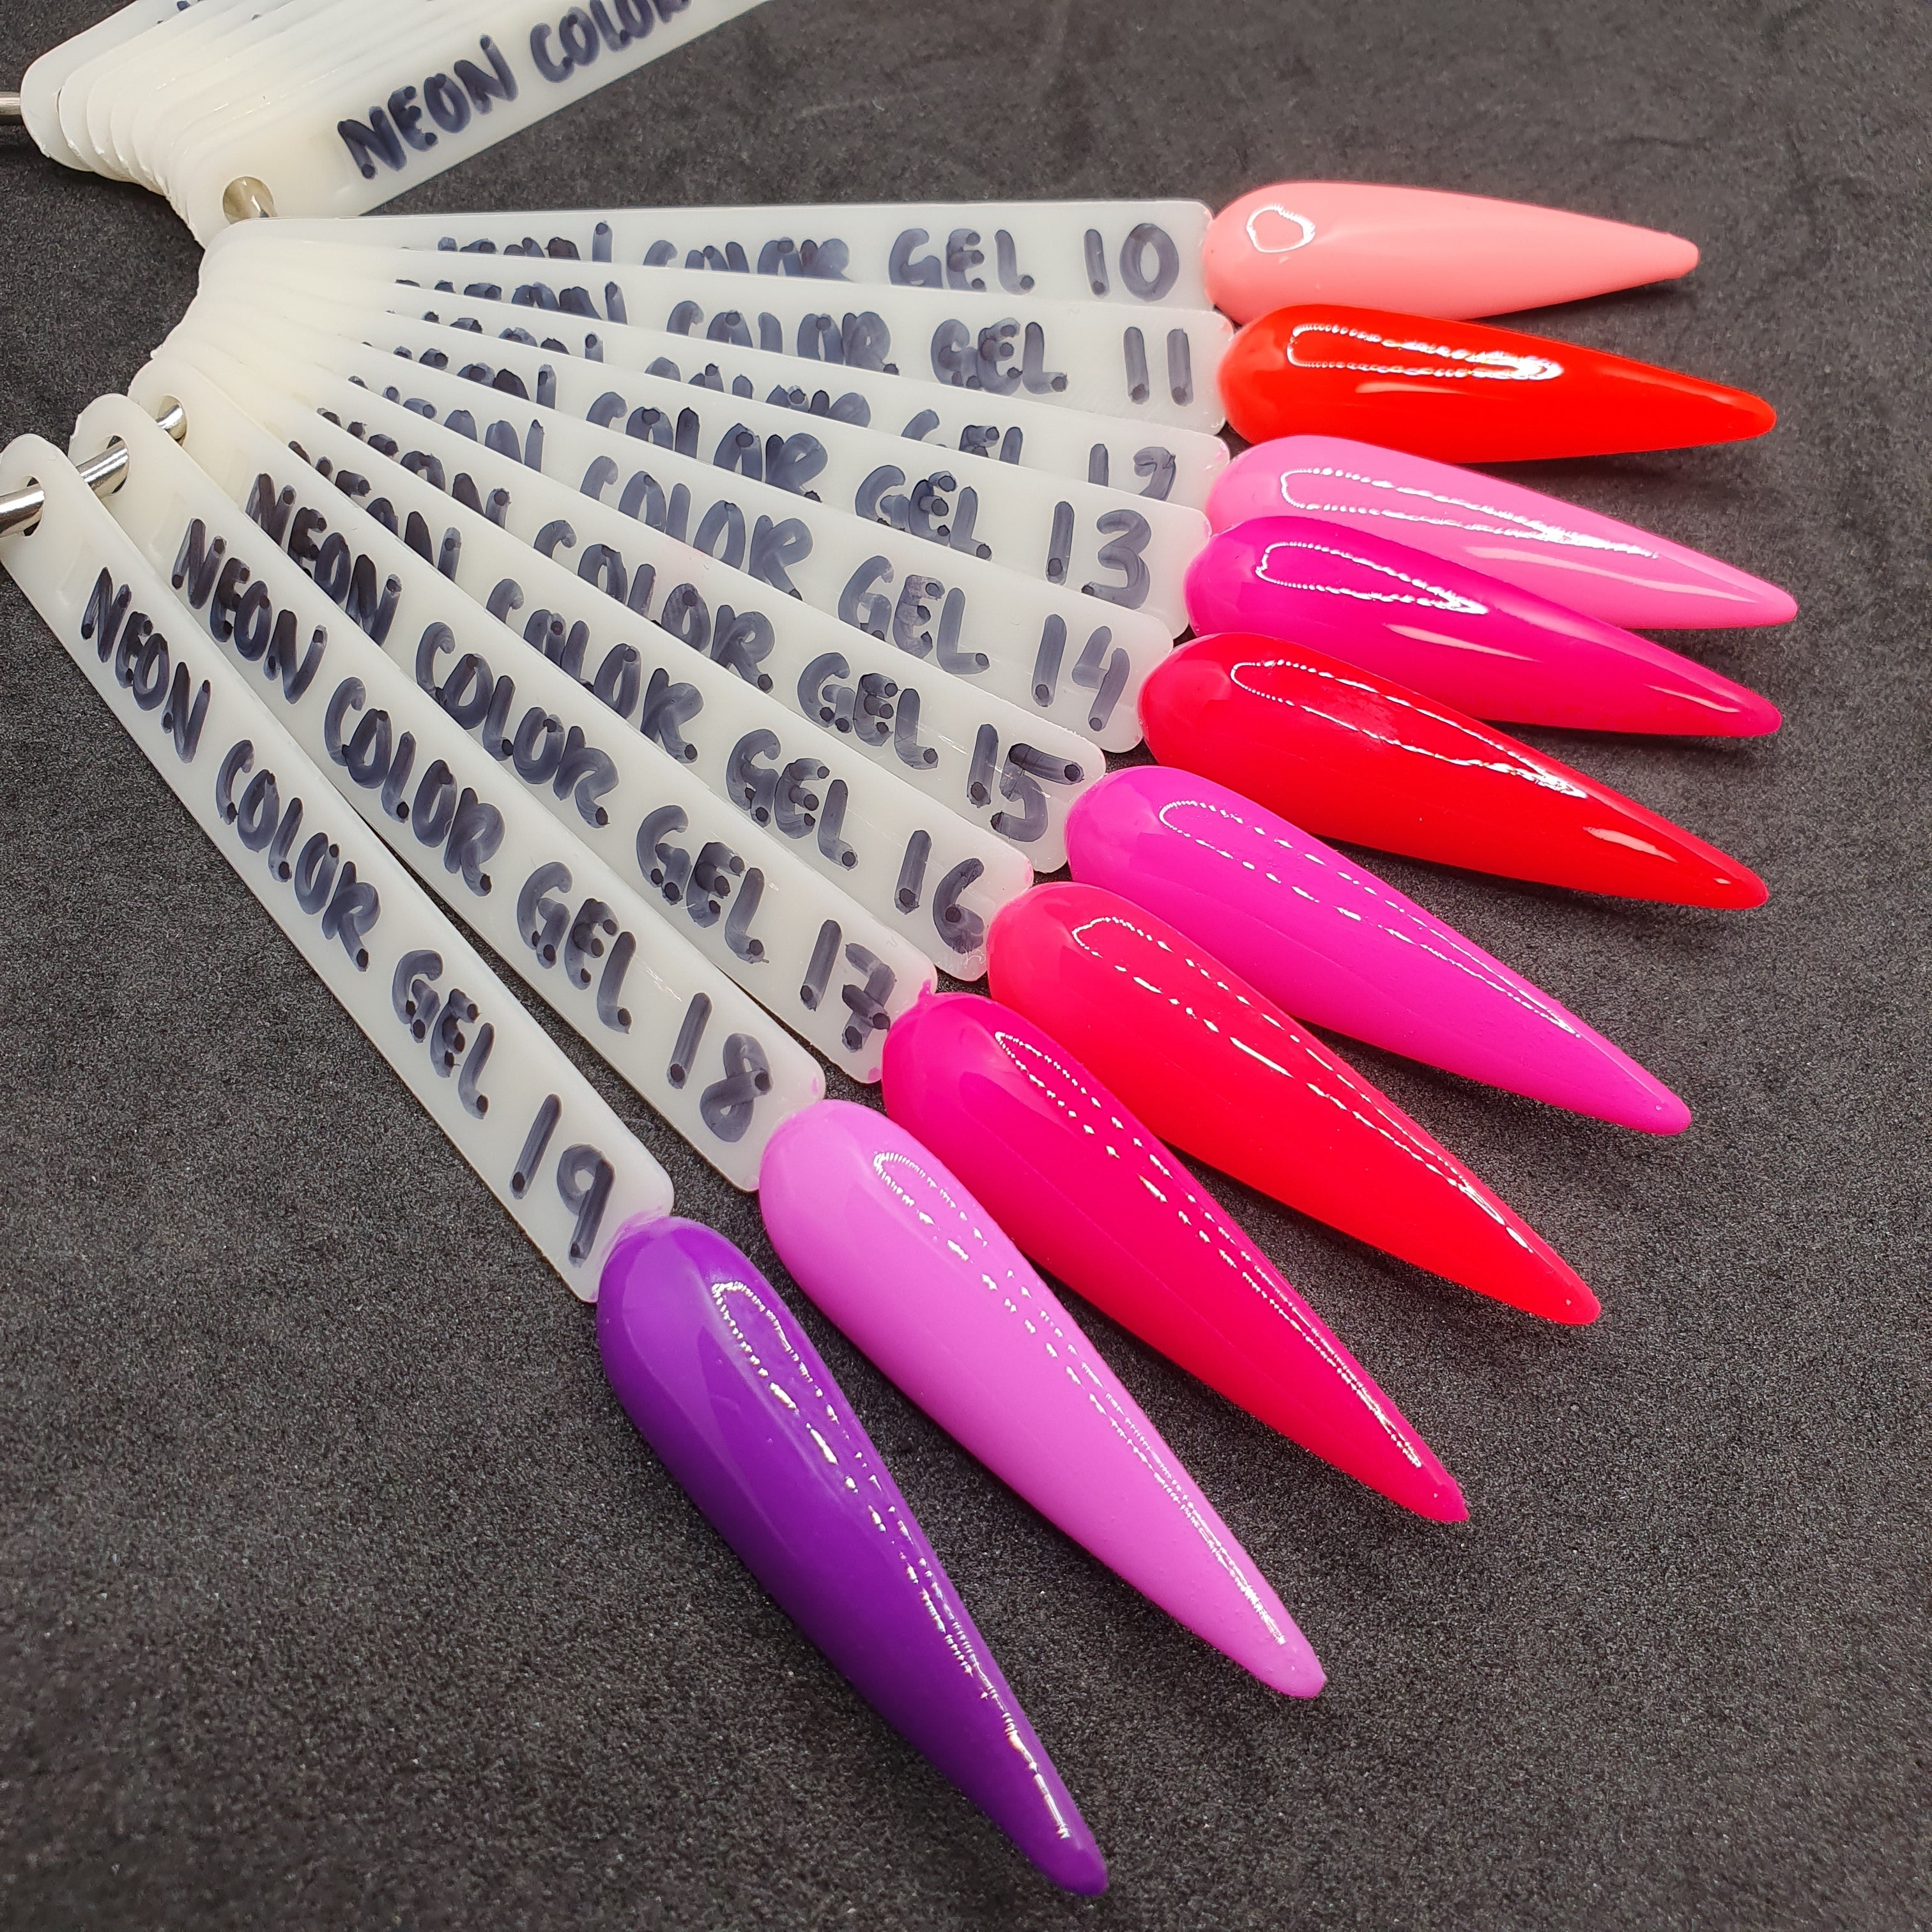 NEW - GND NEON GEL COLOR - 13